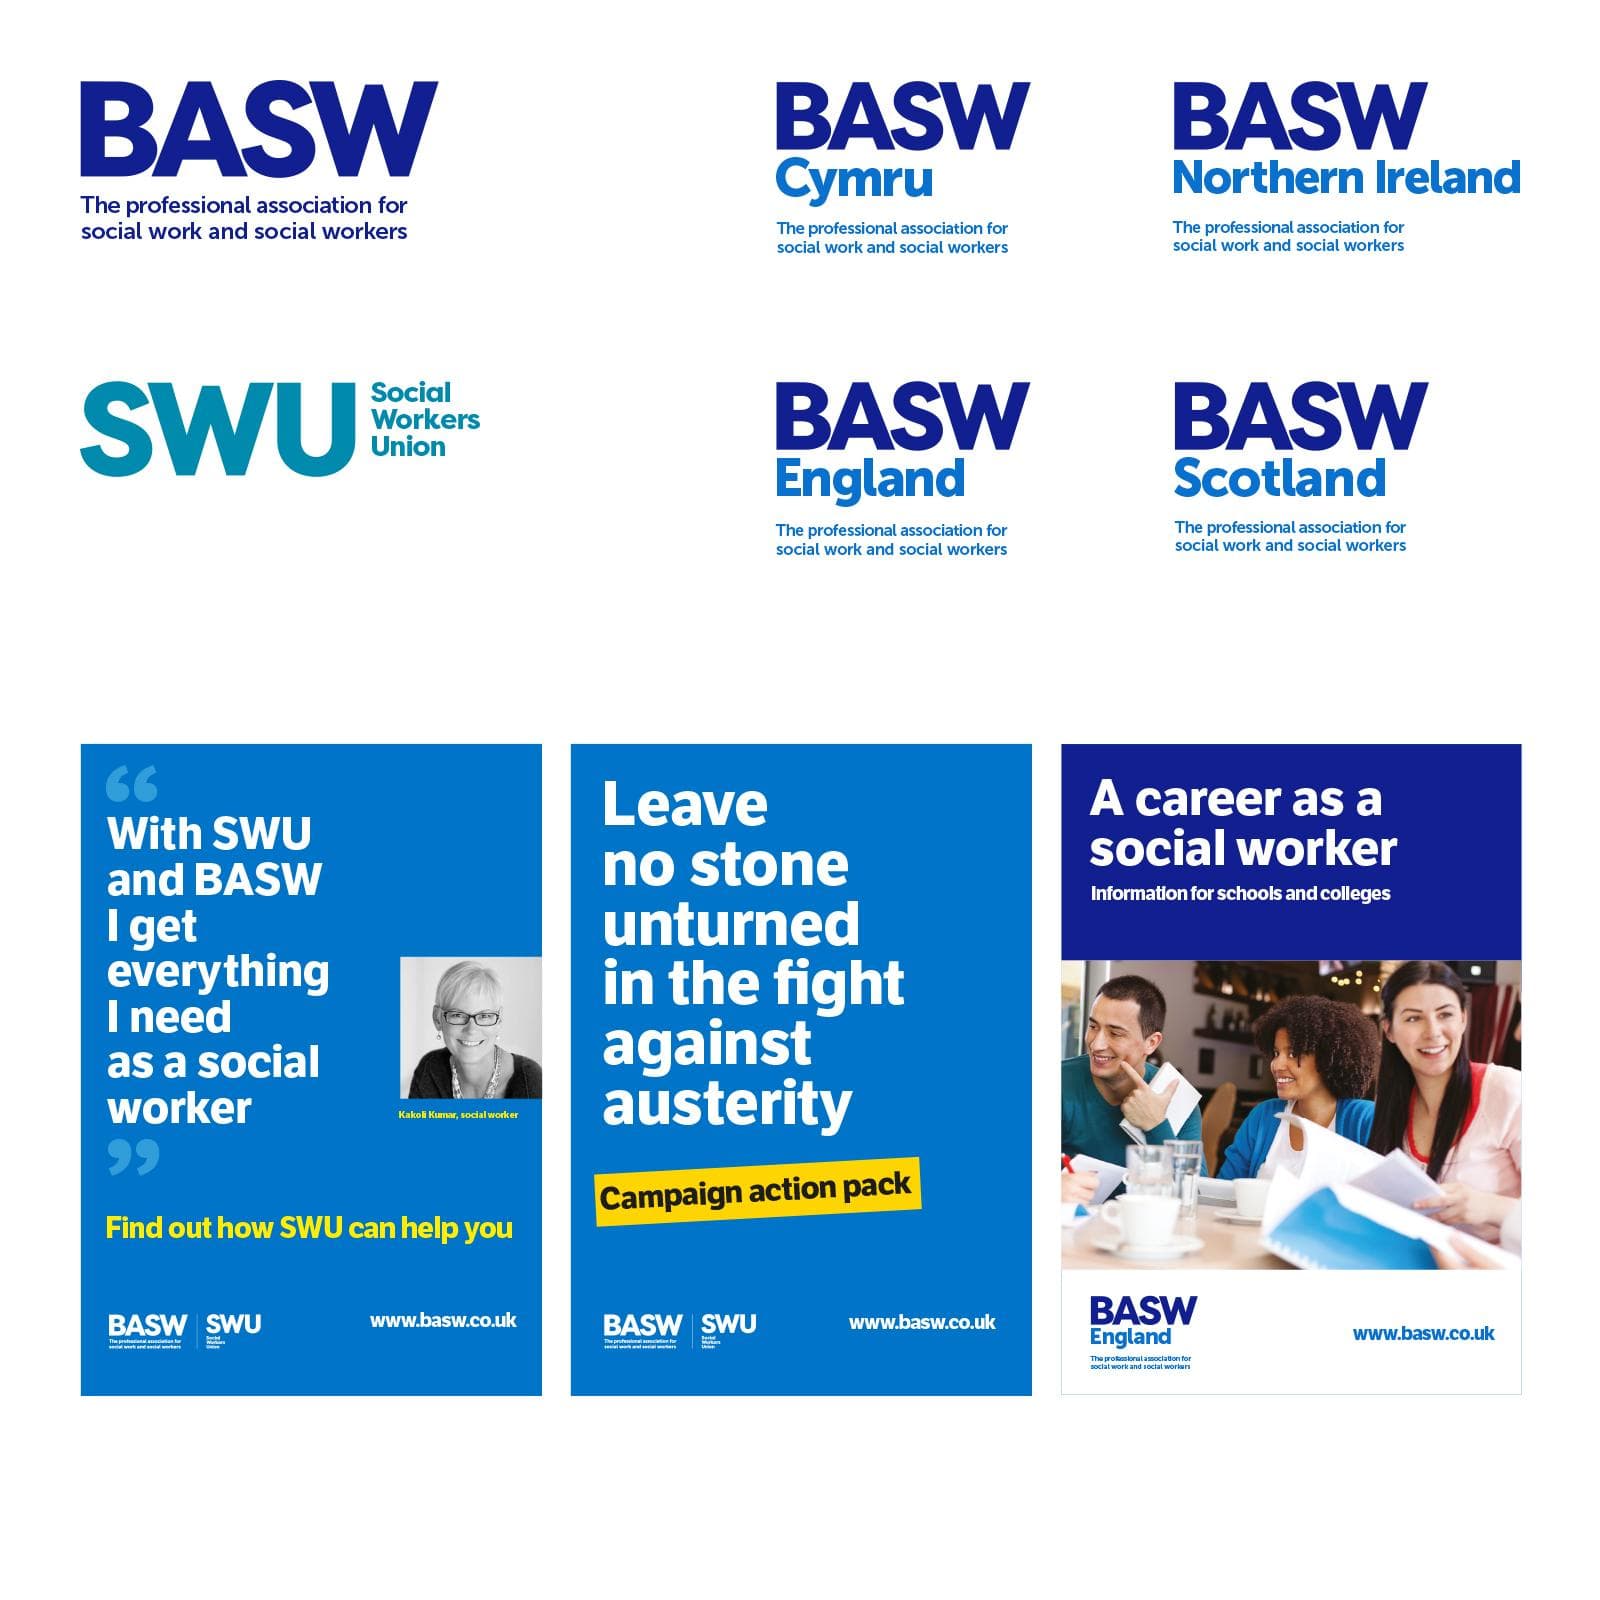 An image showing BASWs new visual identity